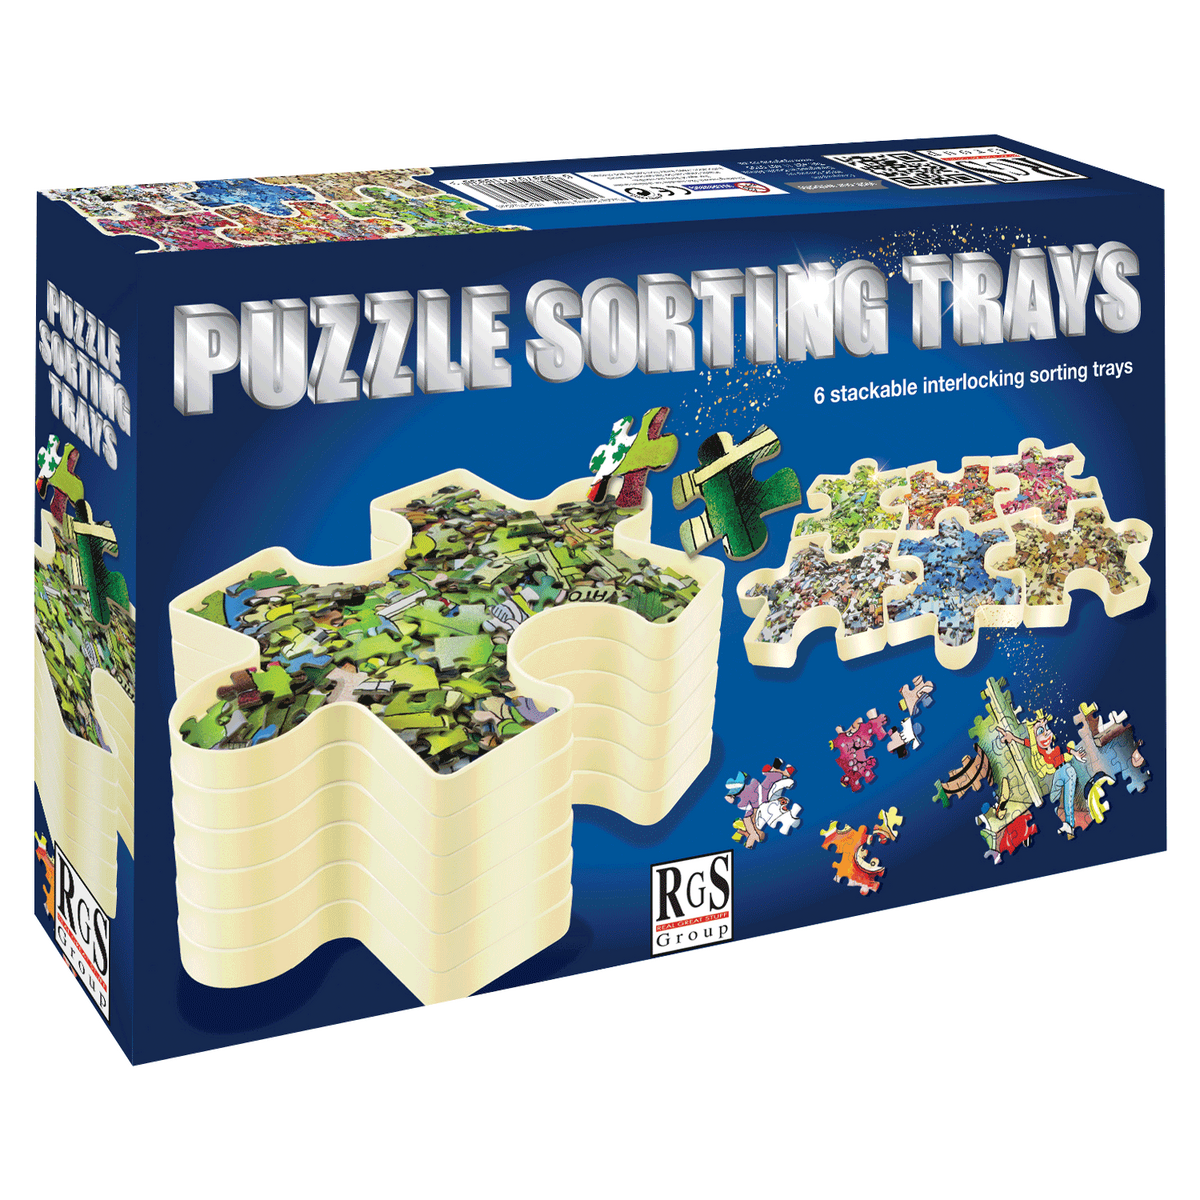 RGS Jigsaw Puzzle Sorter